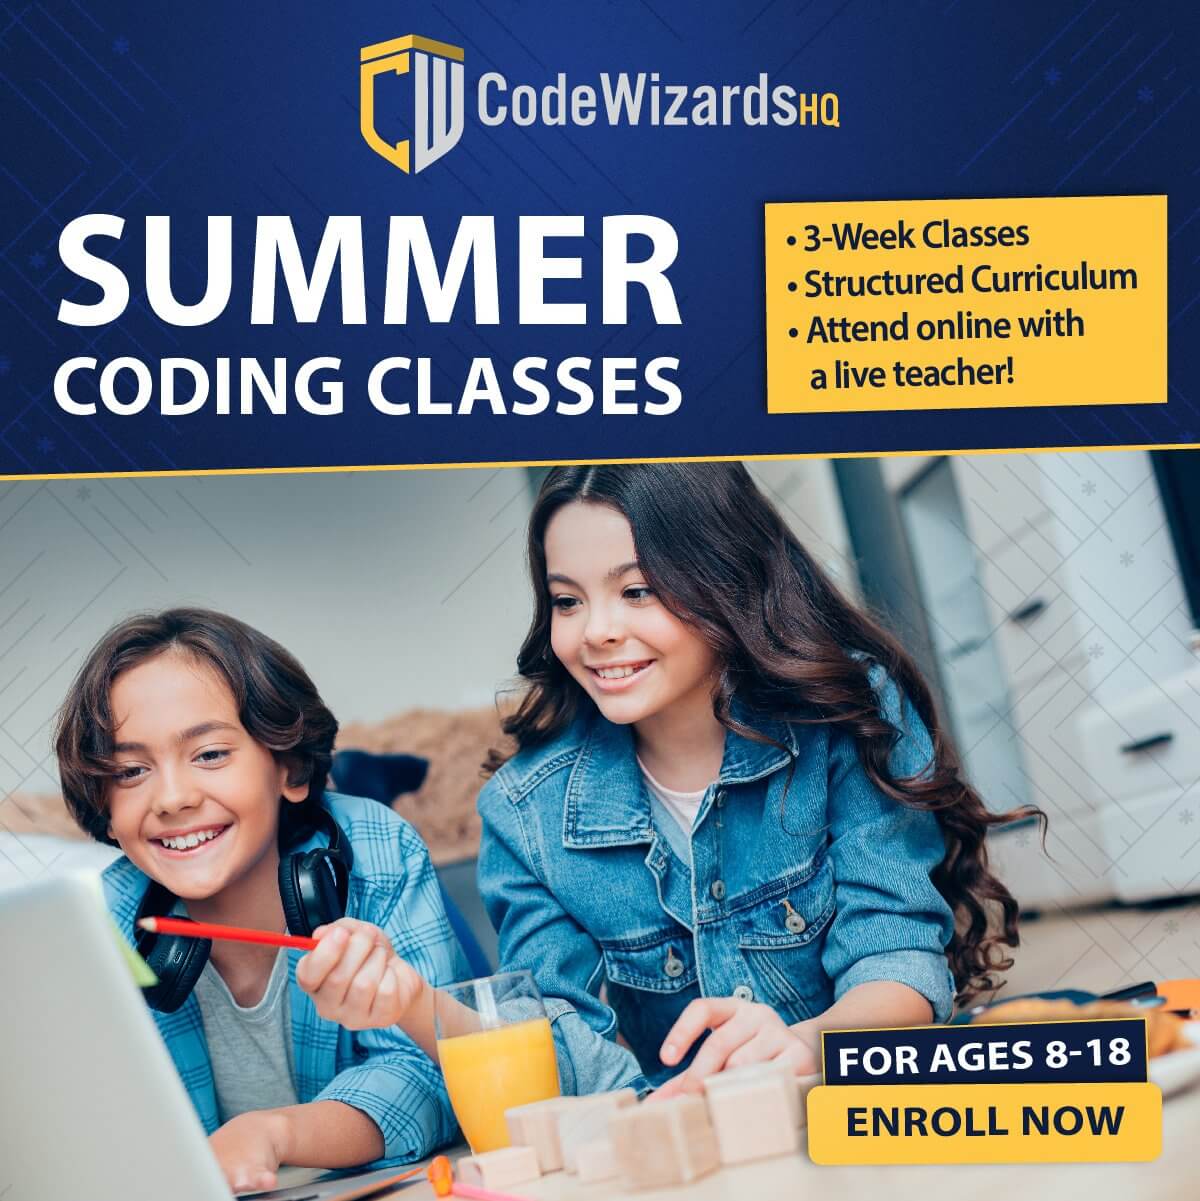 kids coding camp and summer coding classes banner